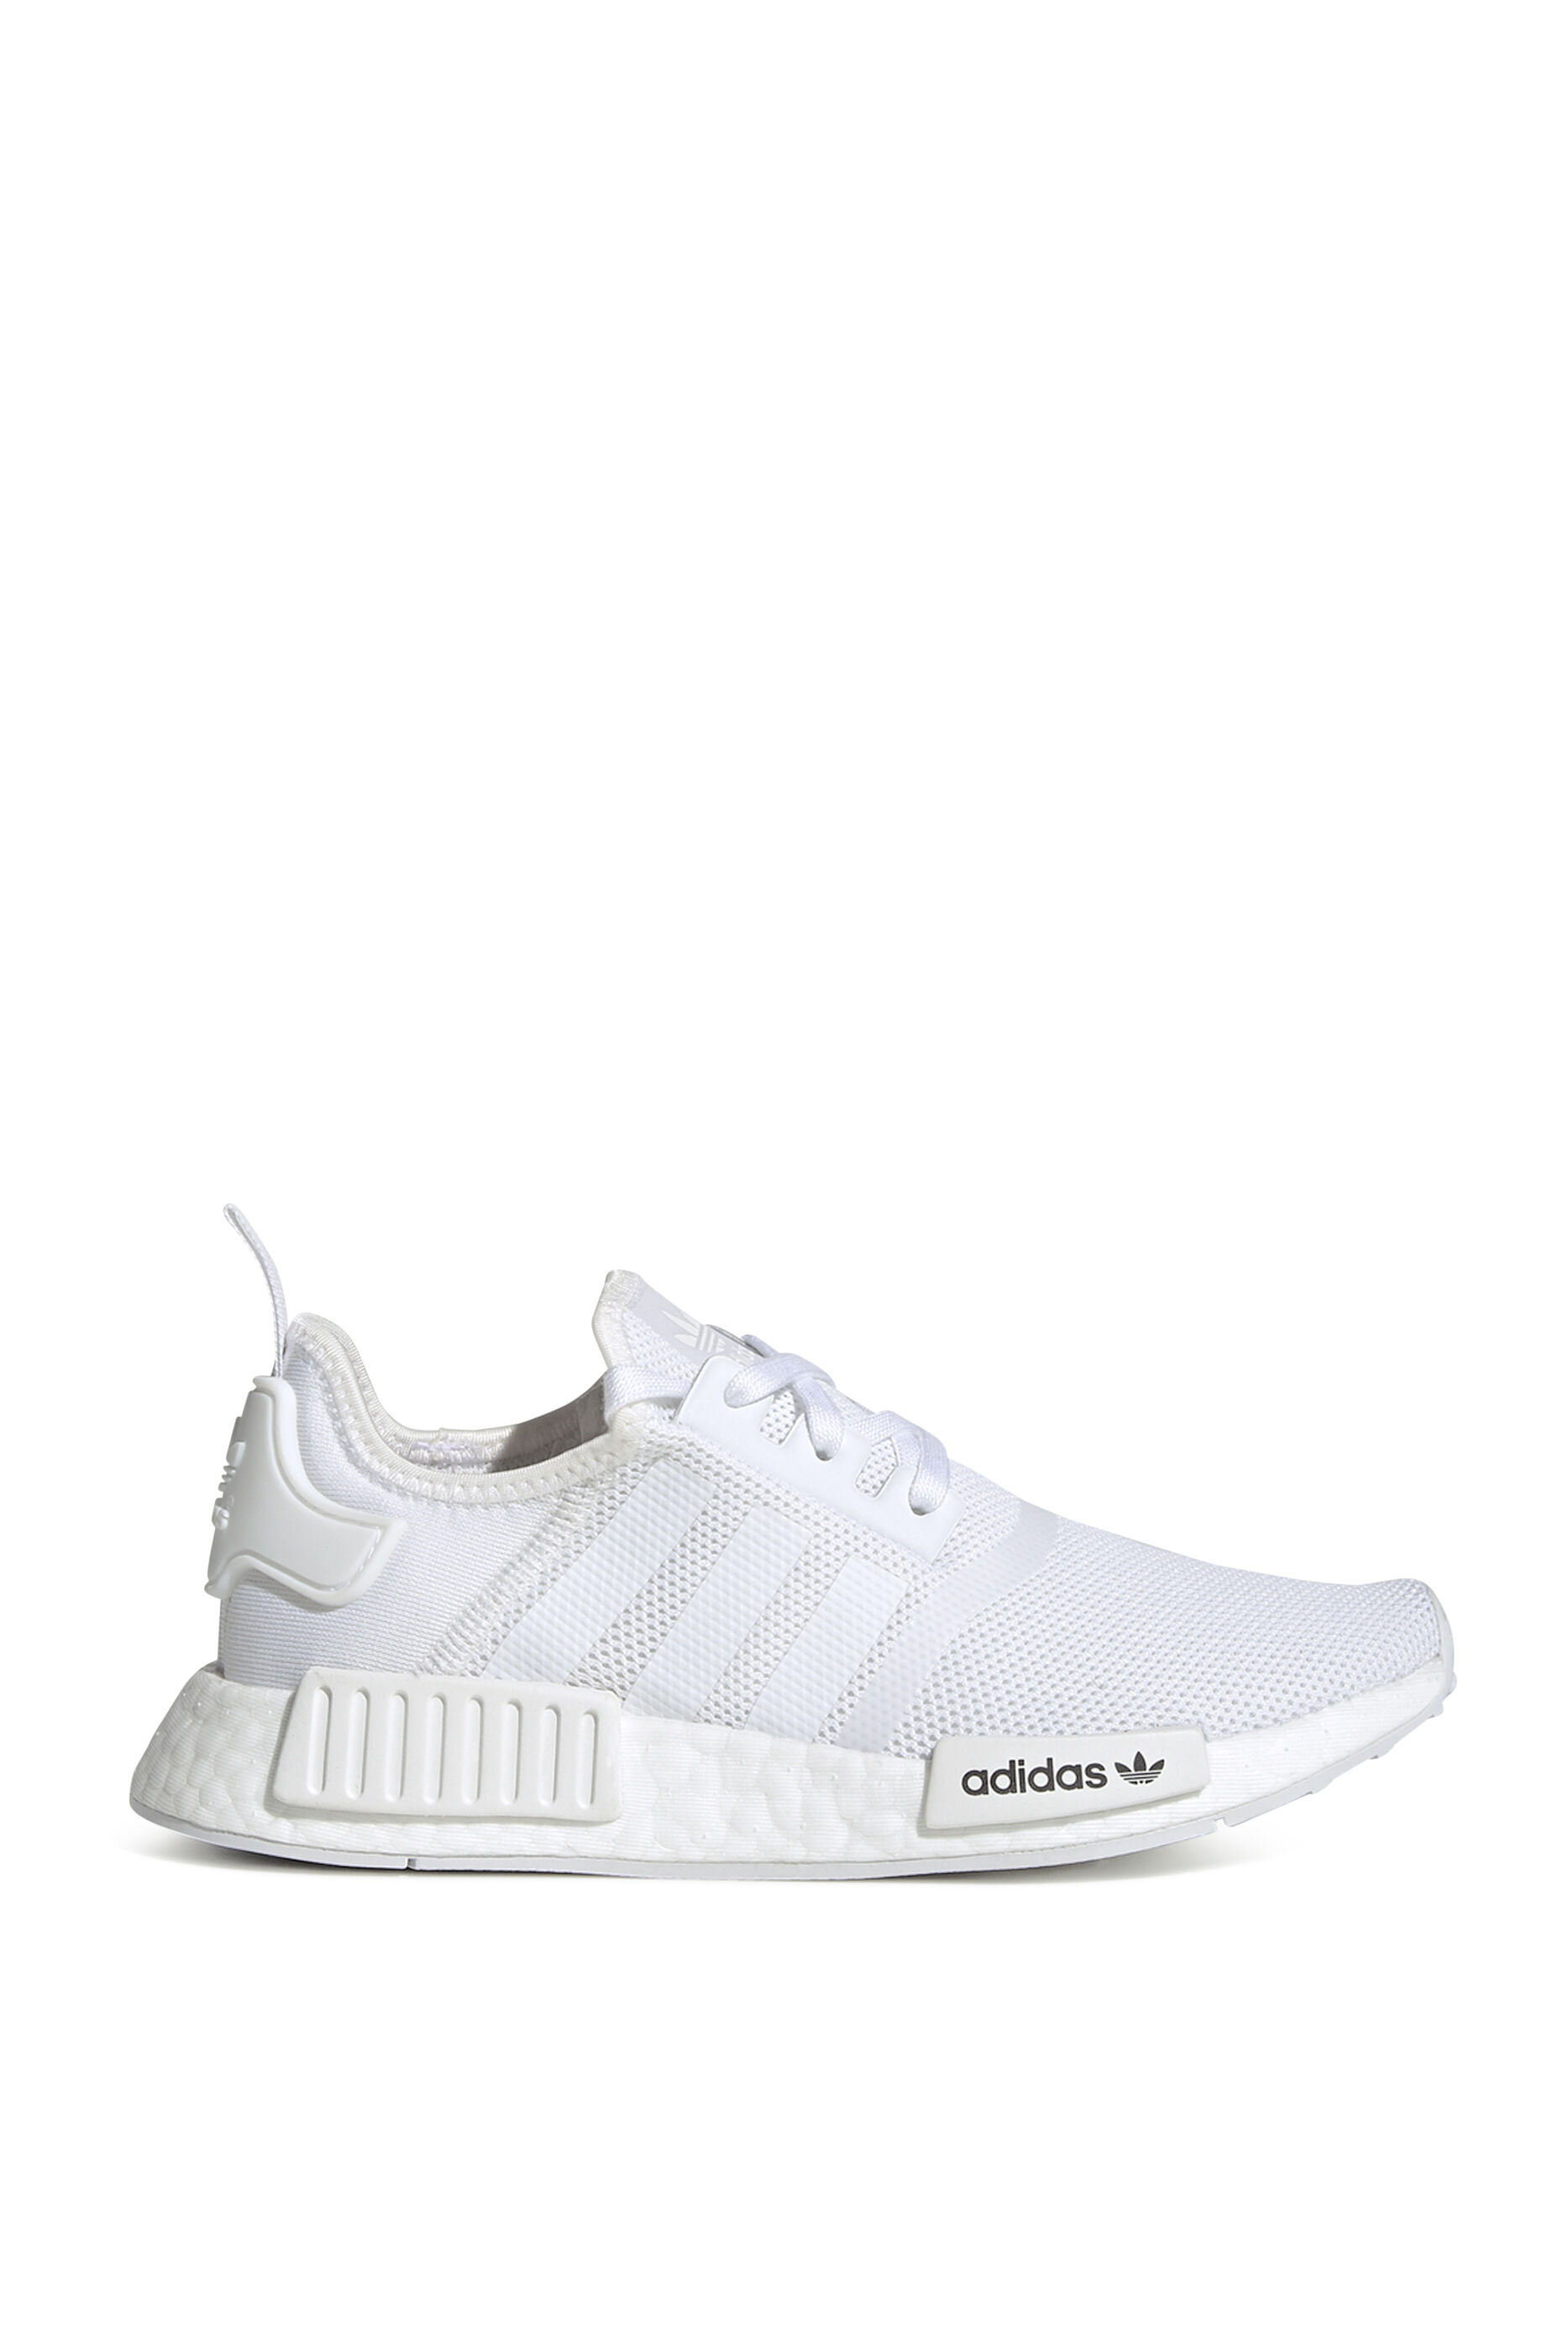 Buy Adidas NMD R1 Sneakers - for AED 